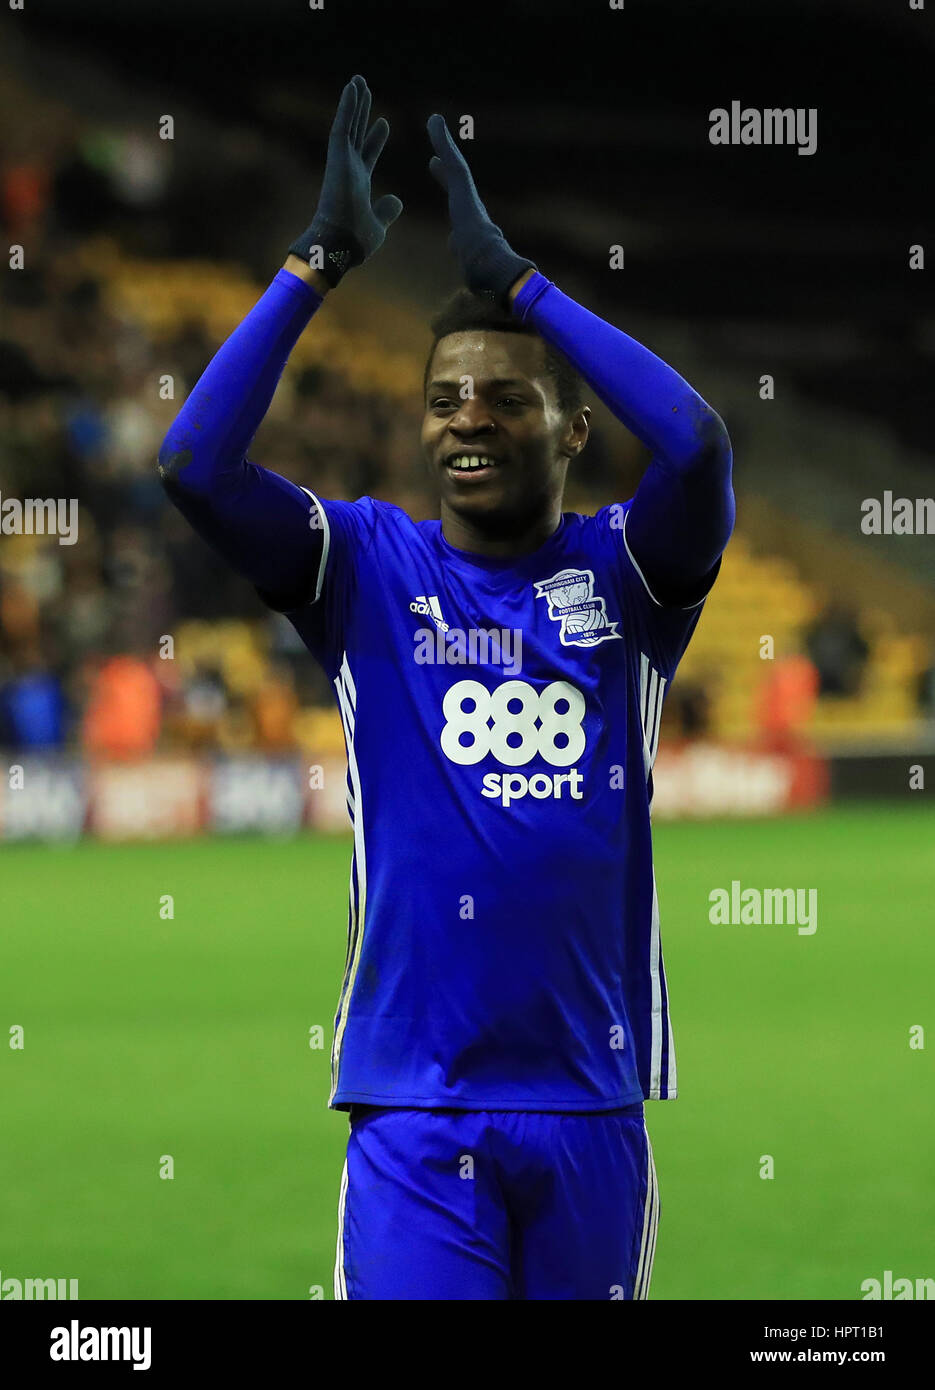 Birmingham City's Cheick Keita applauds the fans after the Sky Bet Championship match at Molineux, Wolverhampton. PRESS ASSOCIATION Photo. Picture date: Friday February 24, 2017. See PA story SOCCER Wolves. Photo credit should read: Tim Goode/PA Wire. RESTRICTIONS: EDITORIAL USE ONLY No use with unauthorised audio, video, data, fixture lists, club/league logos or 'live' services. Online in-match use limited to 75 images, no video emulation. No use in betting, games or single club/league/player publications. Stock Photo